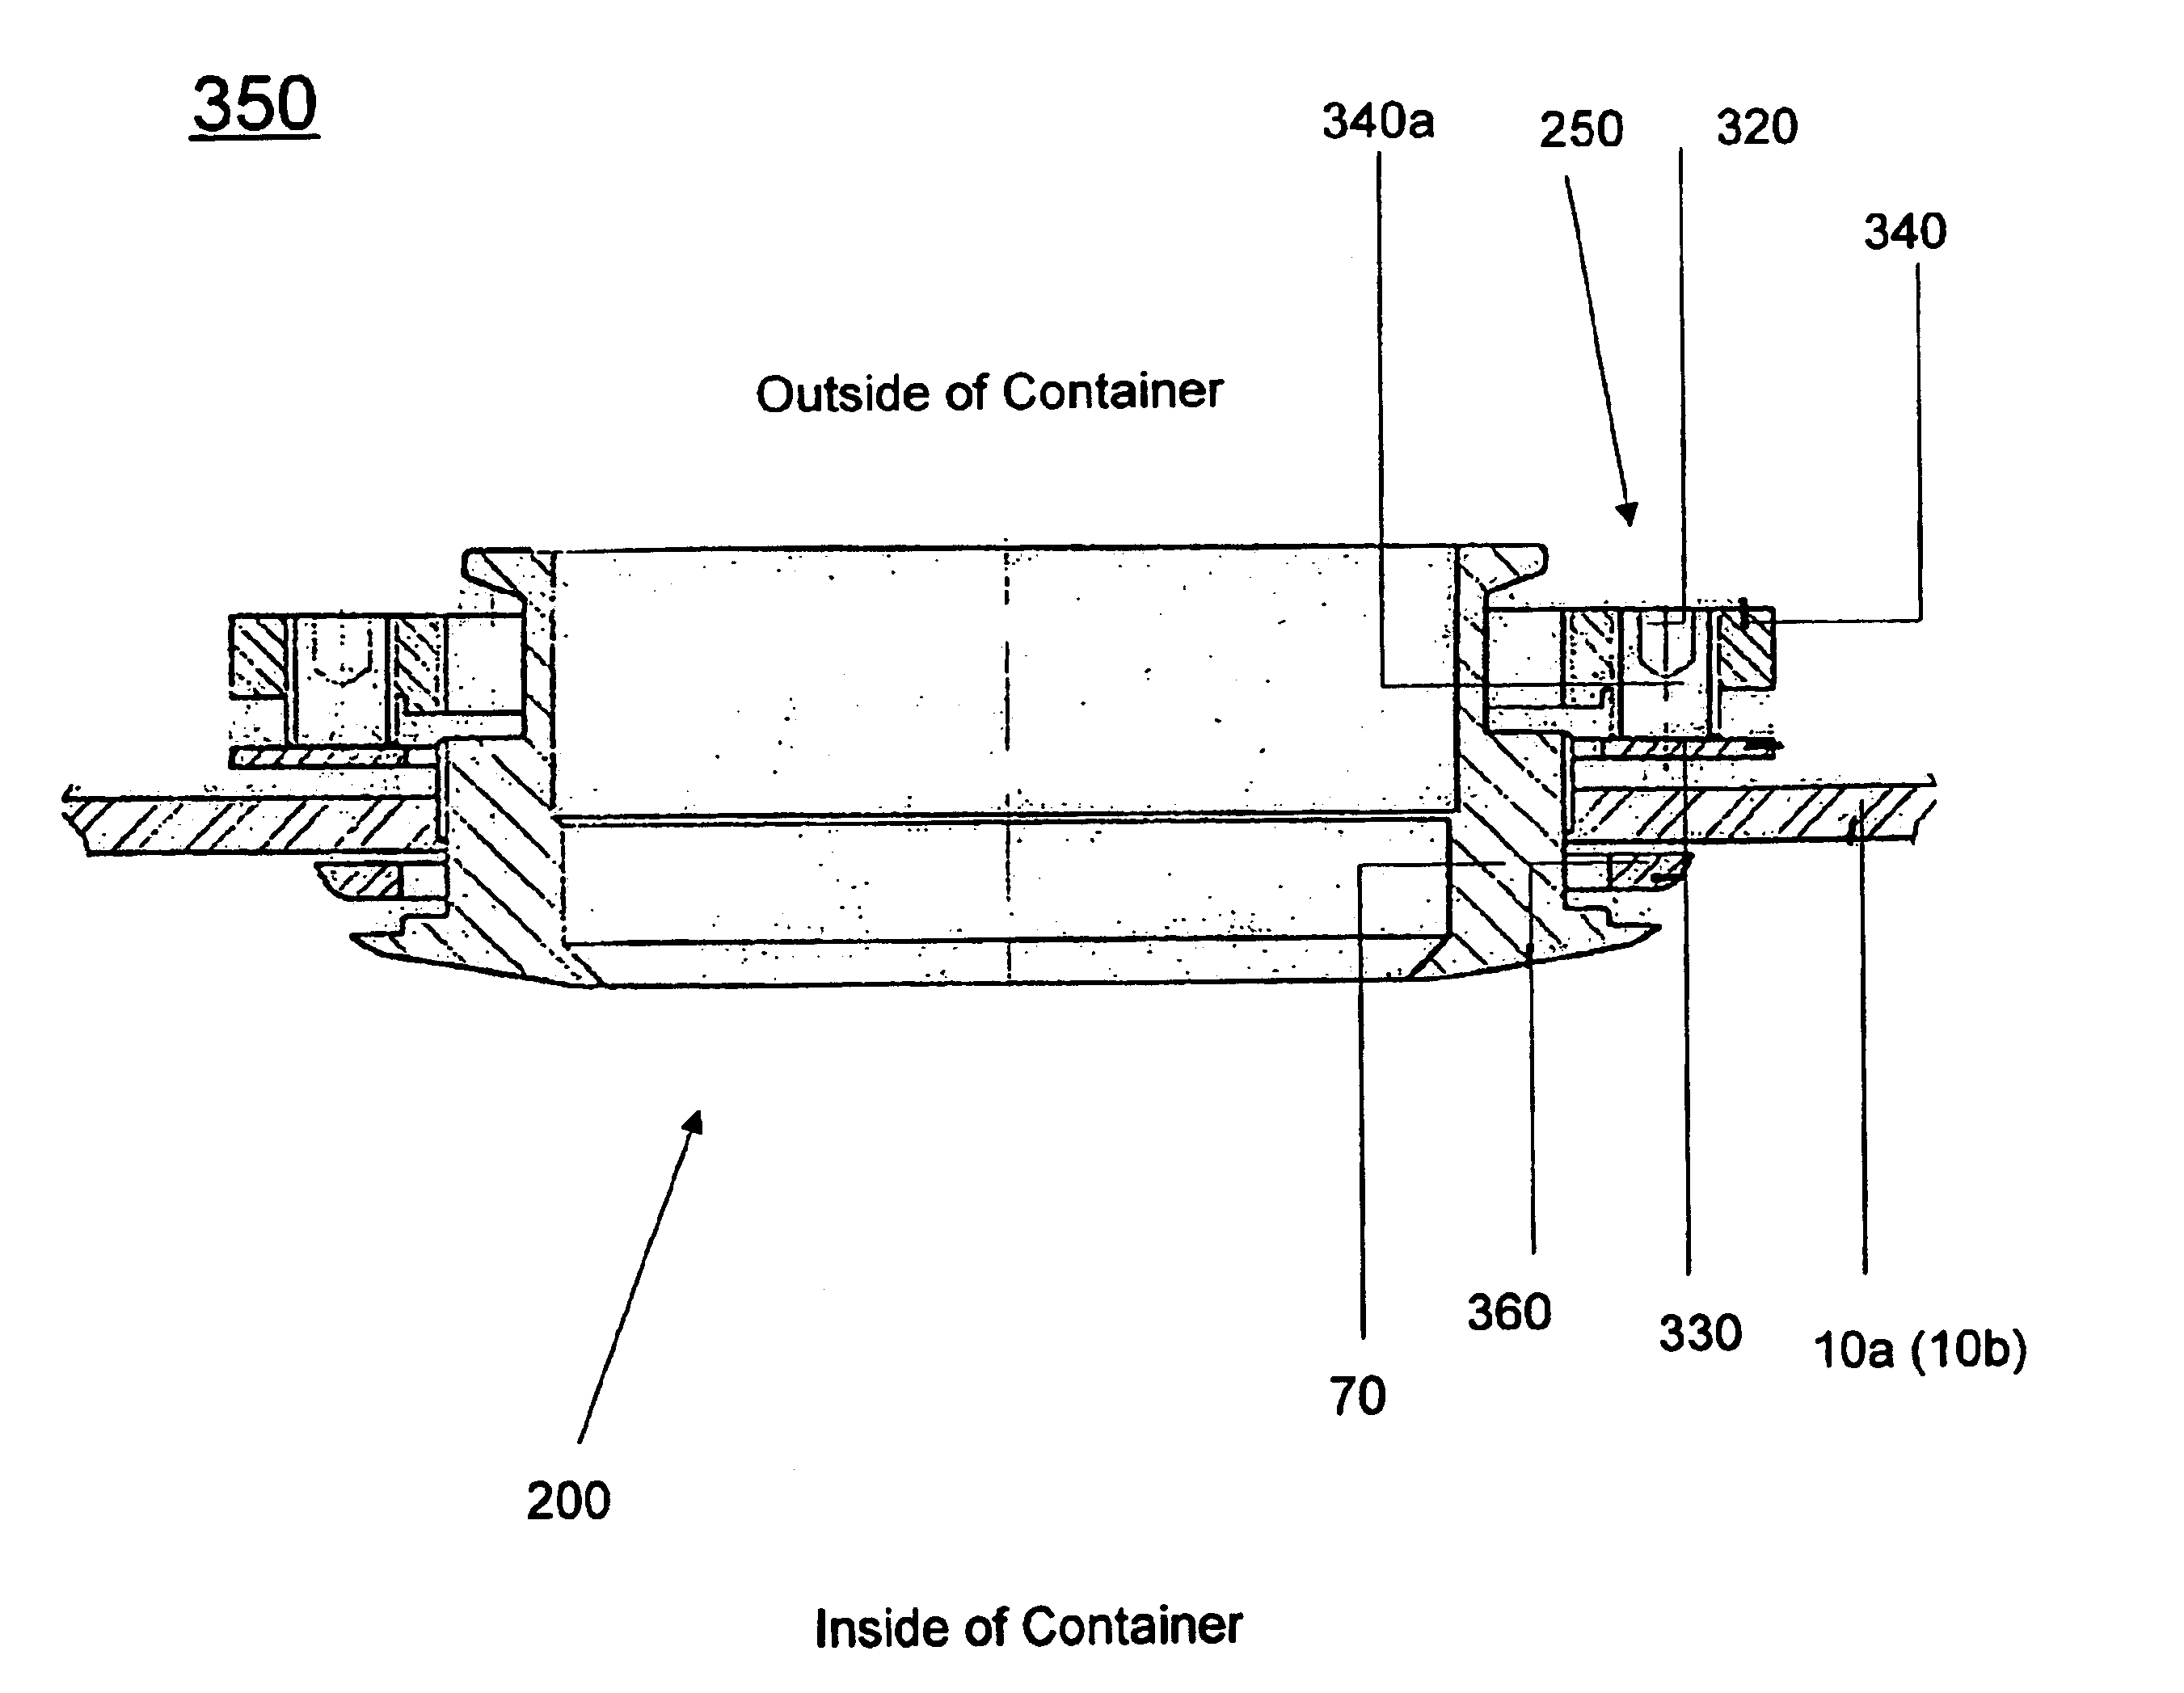 Assemblies adapted to be affixed to containers containing fluid and methods of affixing such assemblies to containers